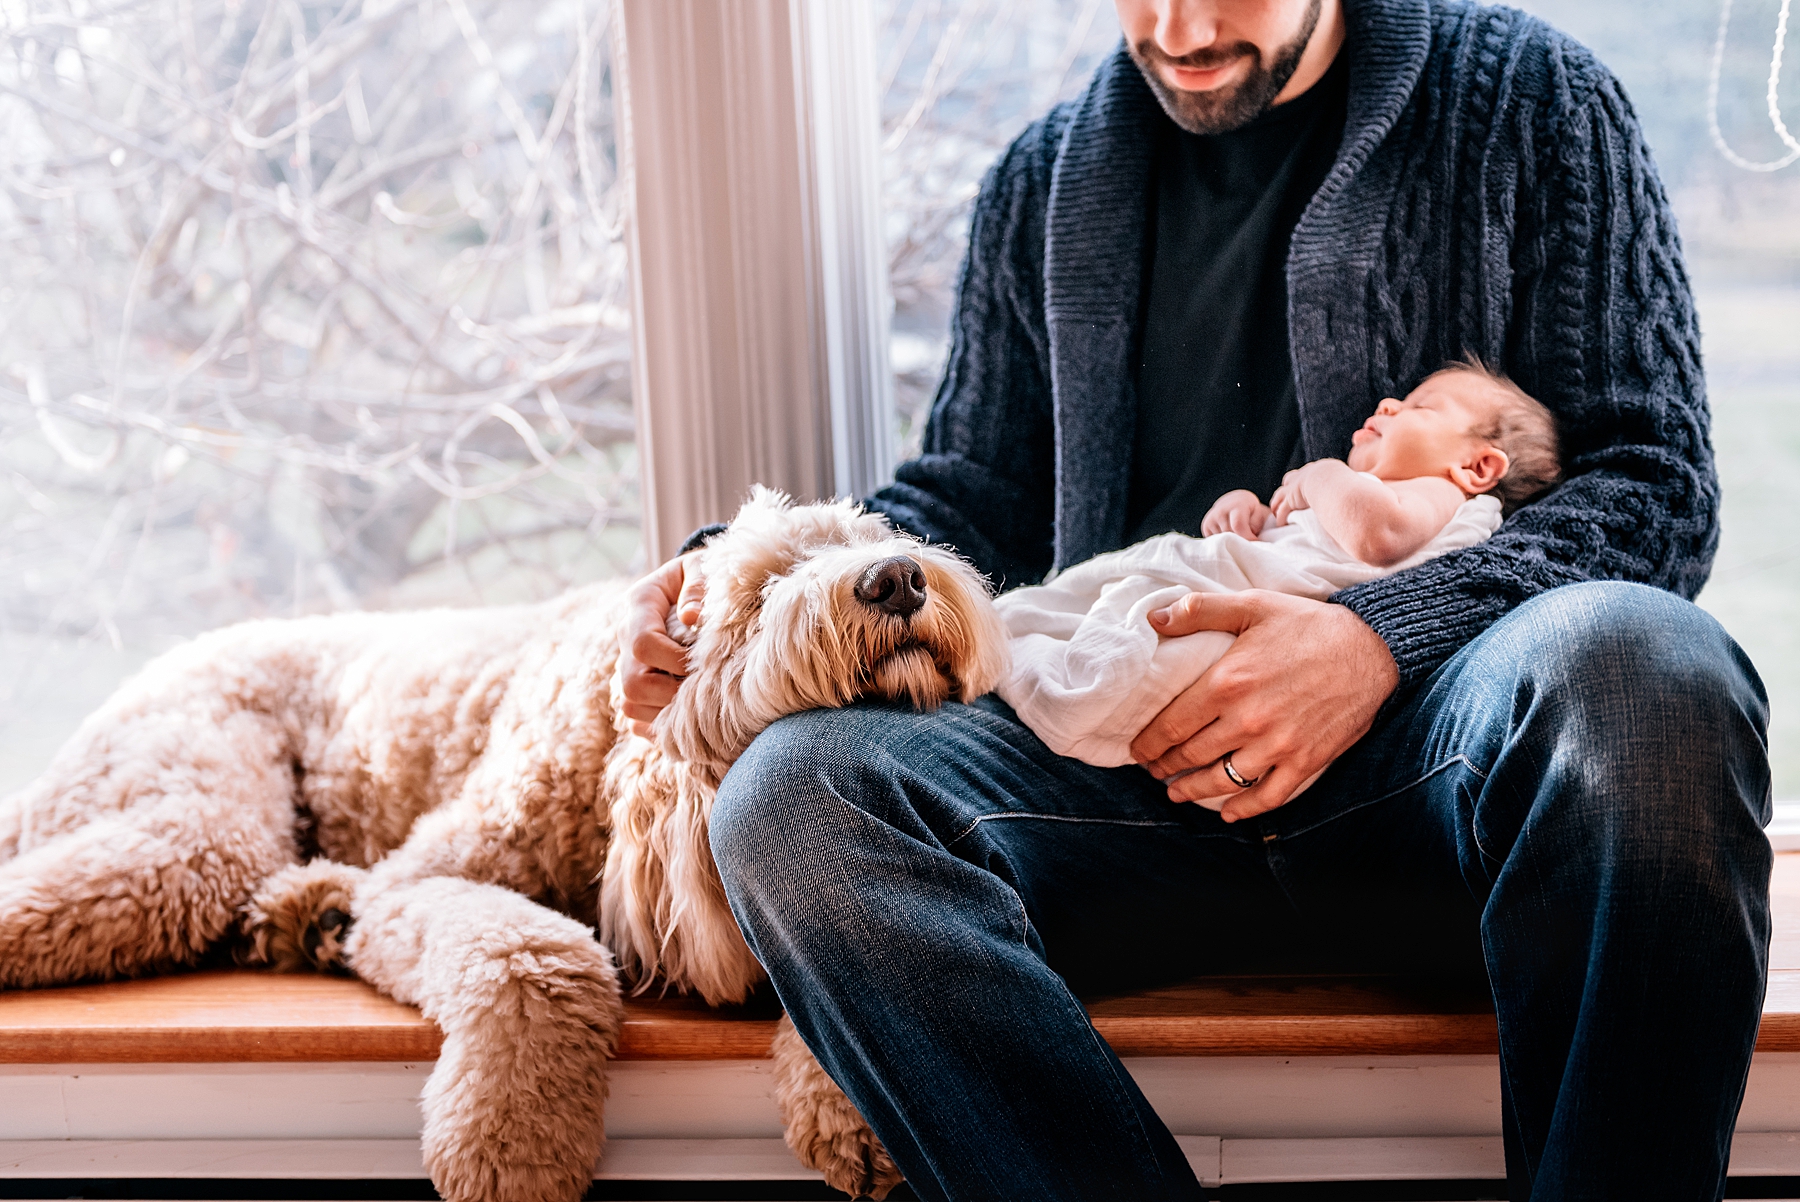 Dad holding his newborn baby and sitting next to his dog.